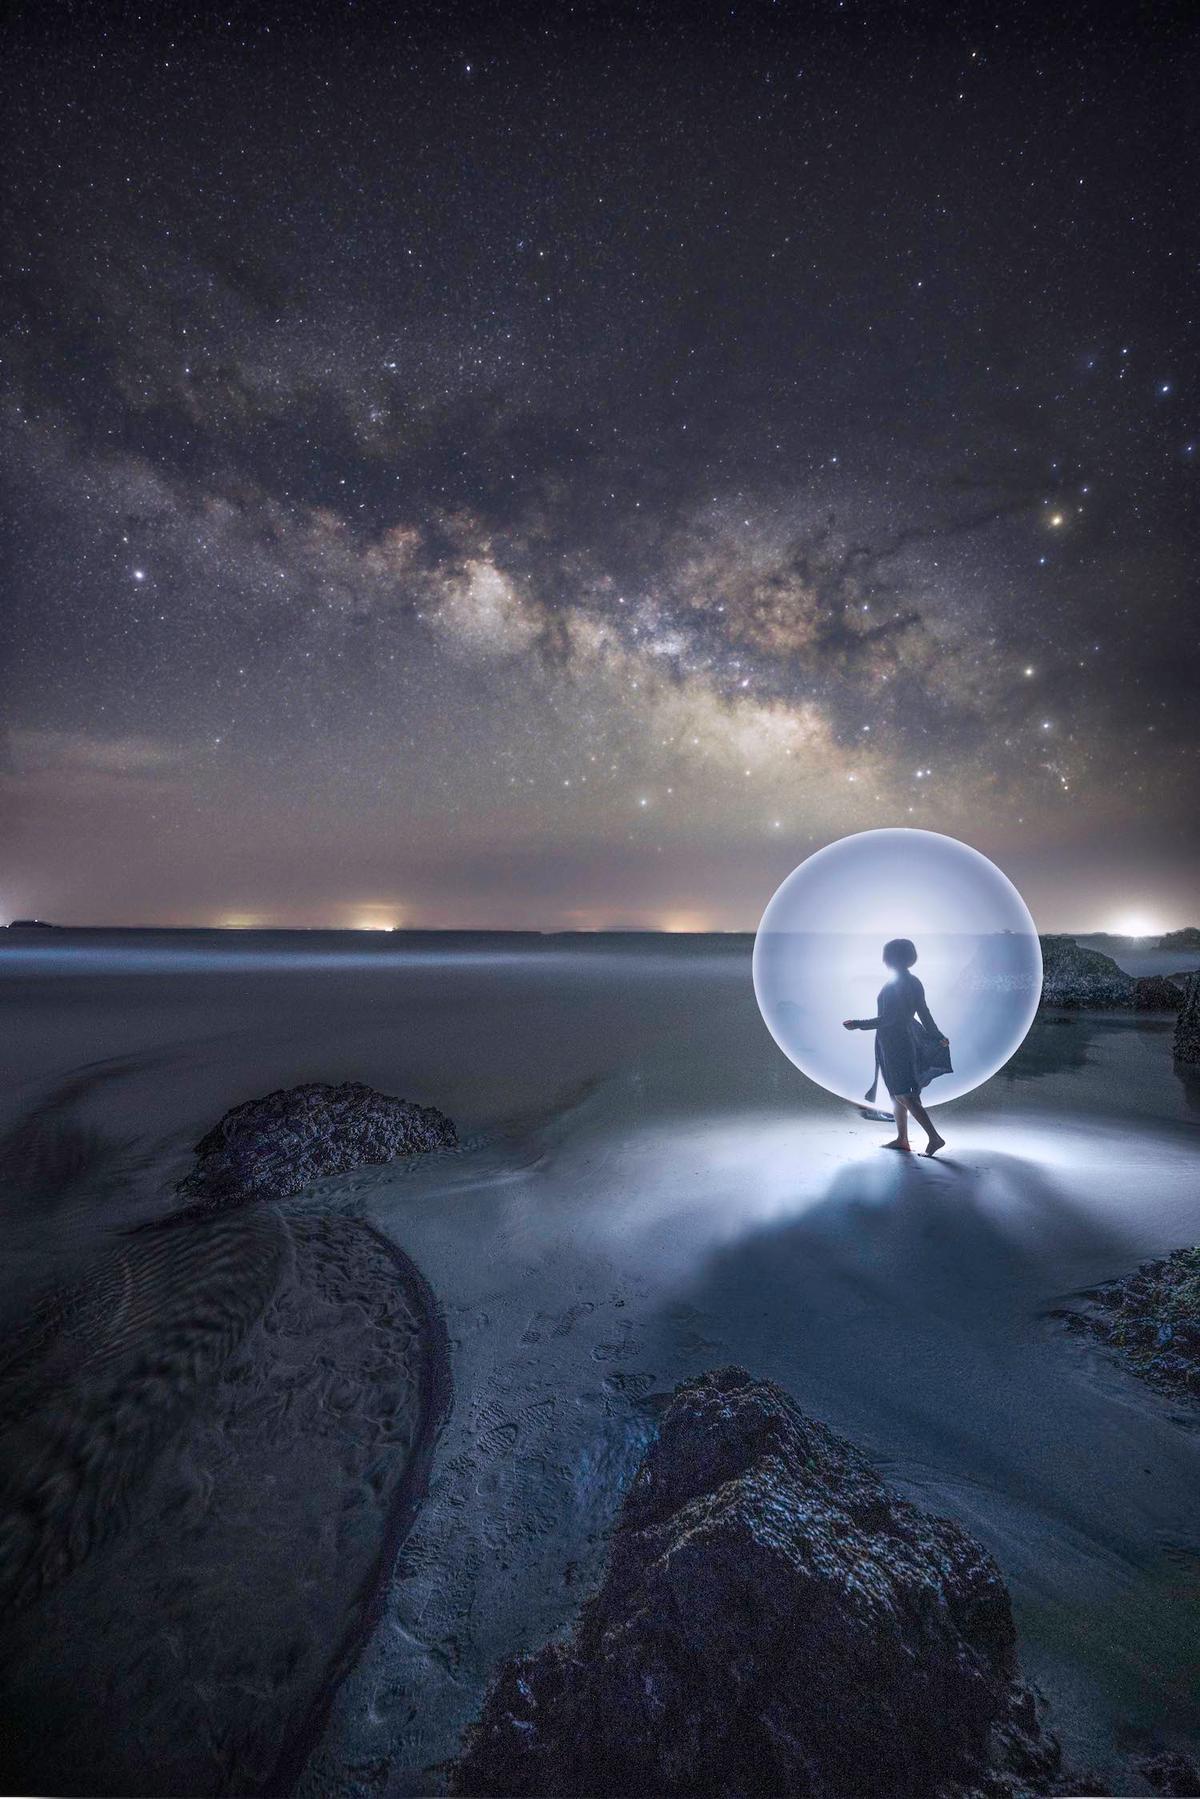 "Milky Way And Circle" by Mituhiro Okabe, Japan. "April on the coast of Japan. I drew the foreground with light paint against the background of the Milky Way." (© Mituhiro Okabe, Japan, 3rd Place, National Awards, Creative, 2022 Sony World Photography Awards)